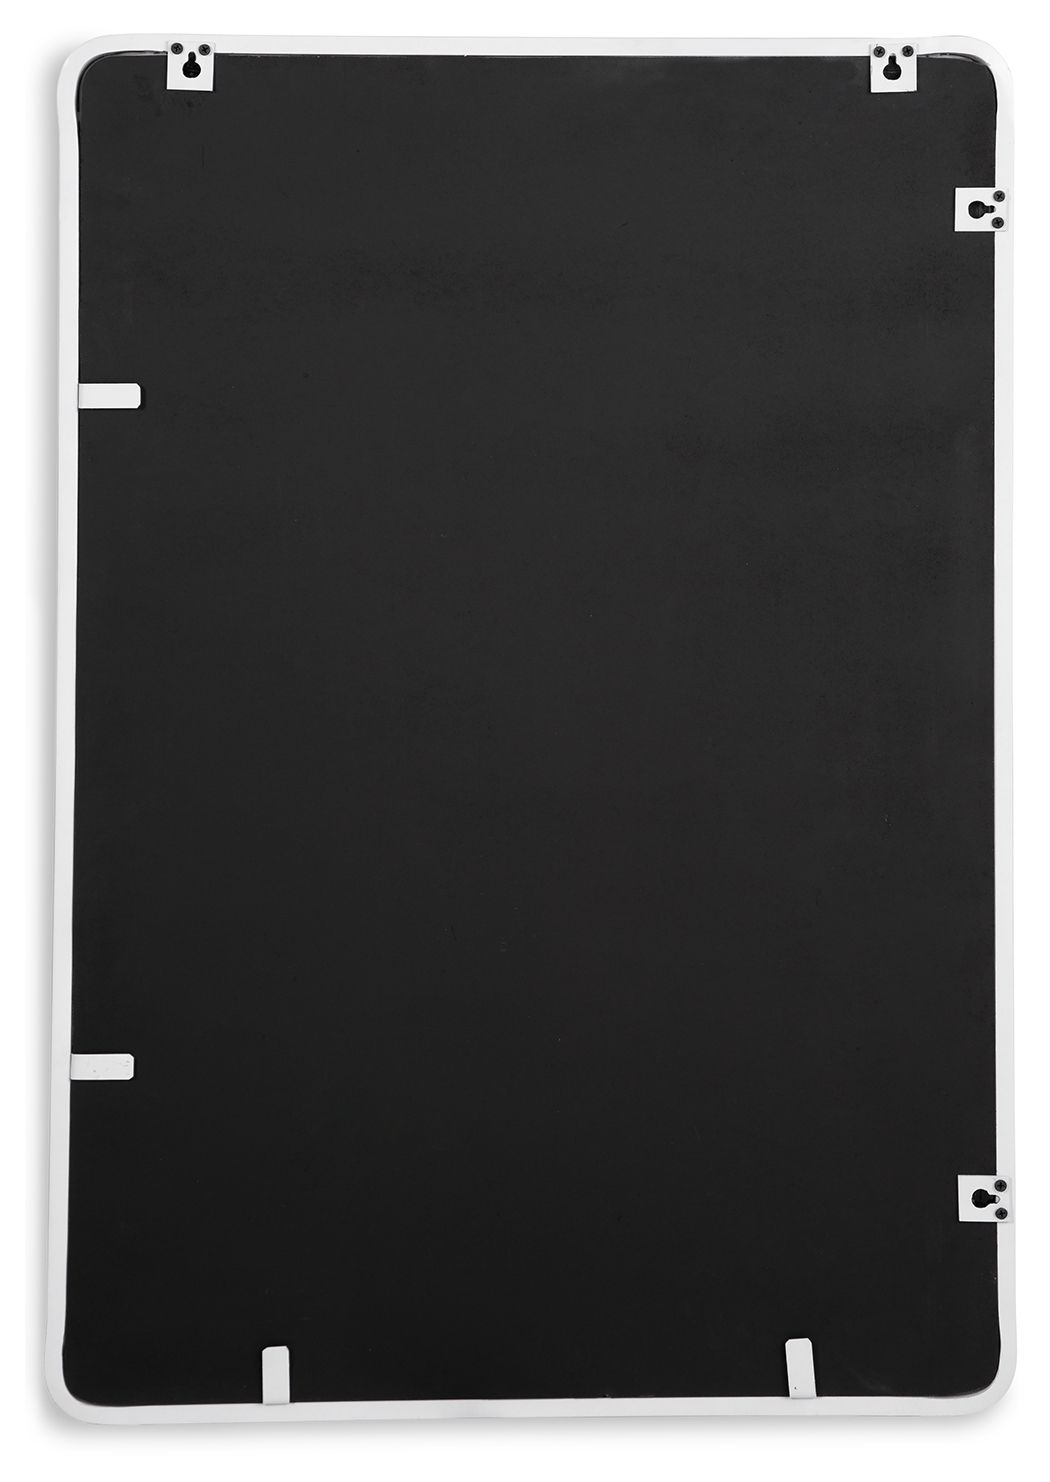 Brocky - Rectangle Accent Mirror